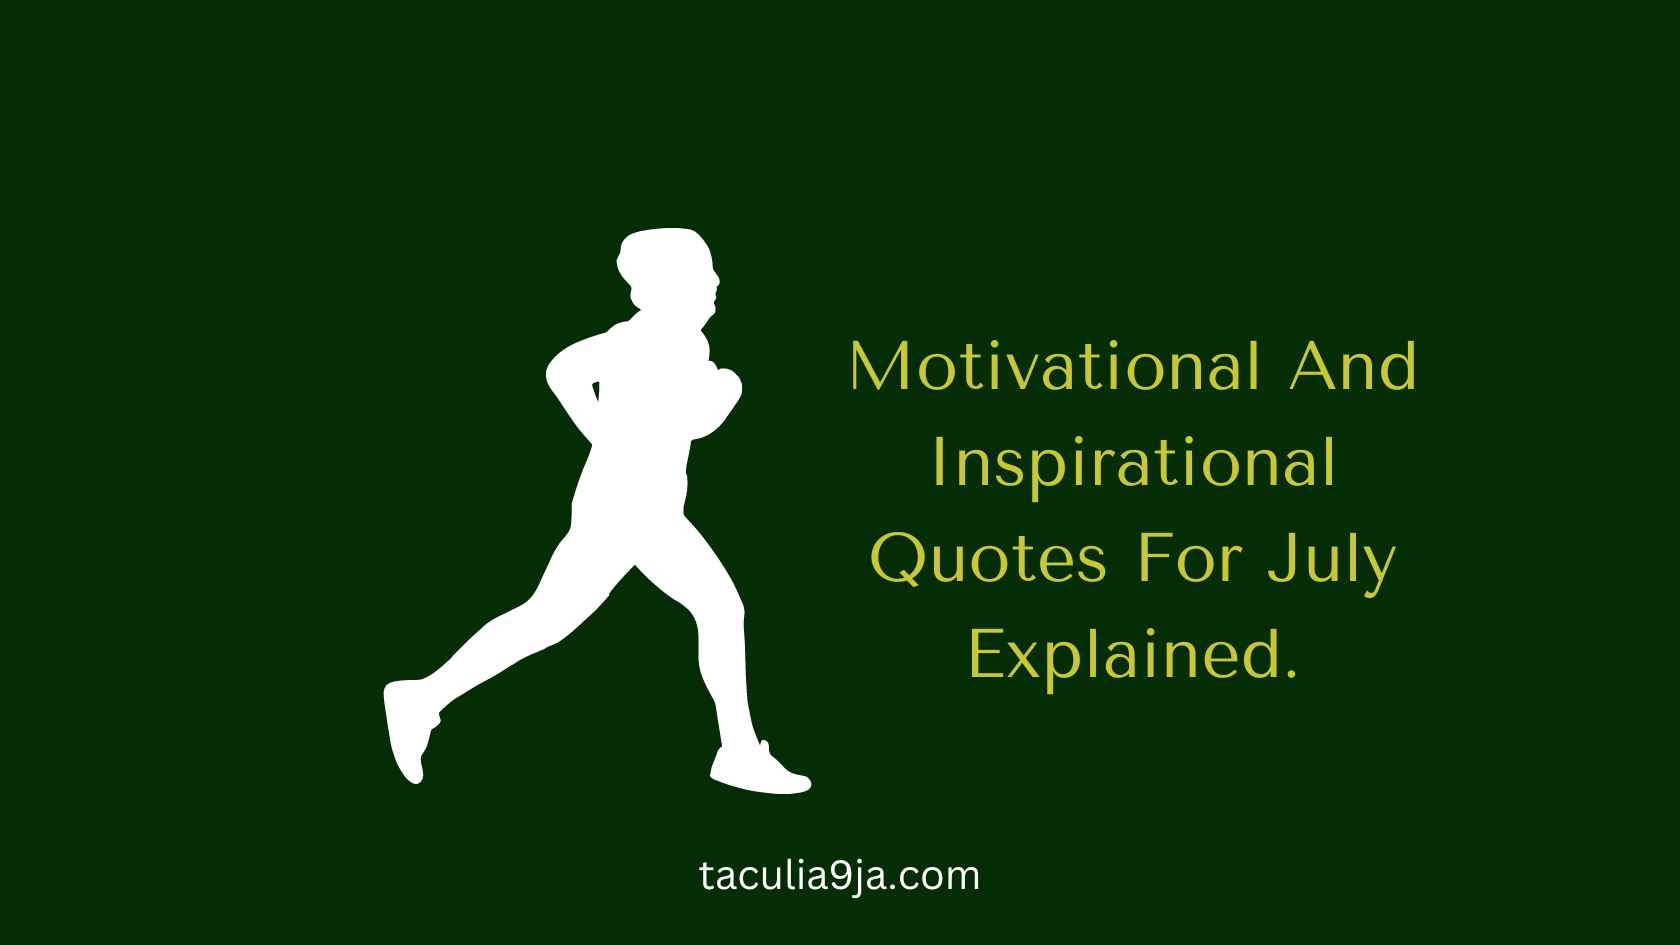 motivational and inspirational quotes for July explained